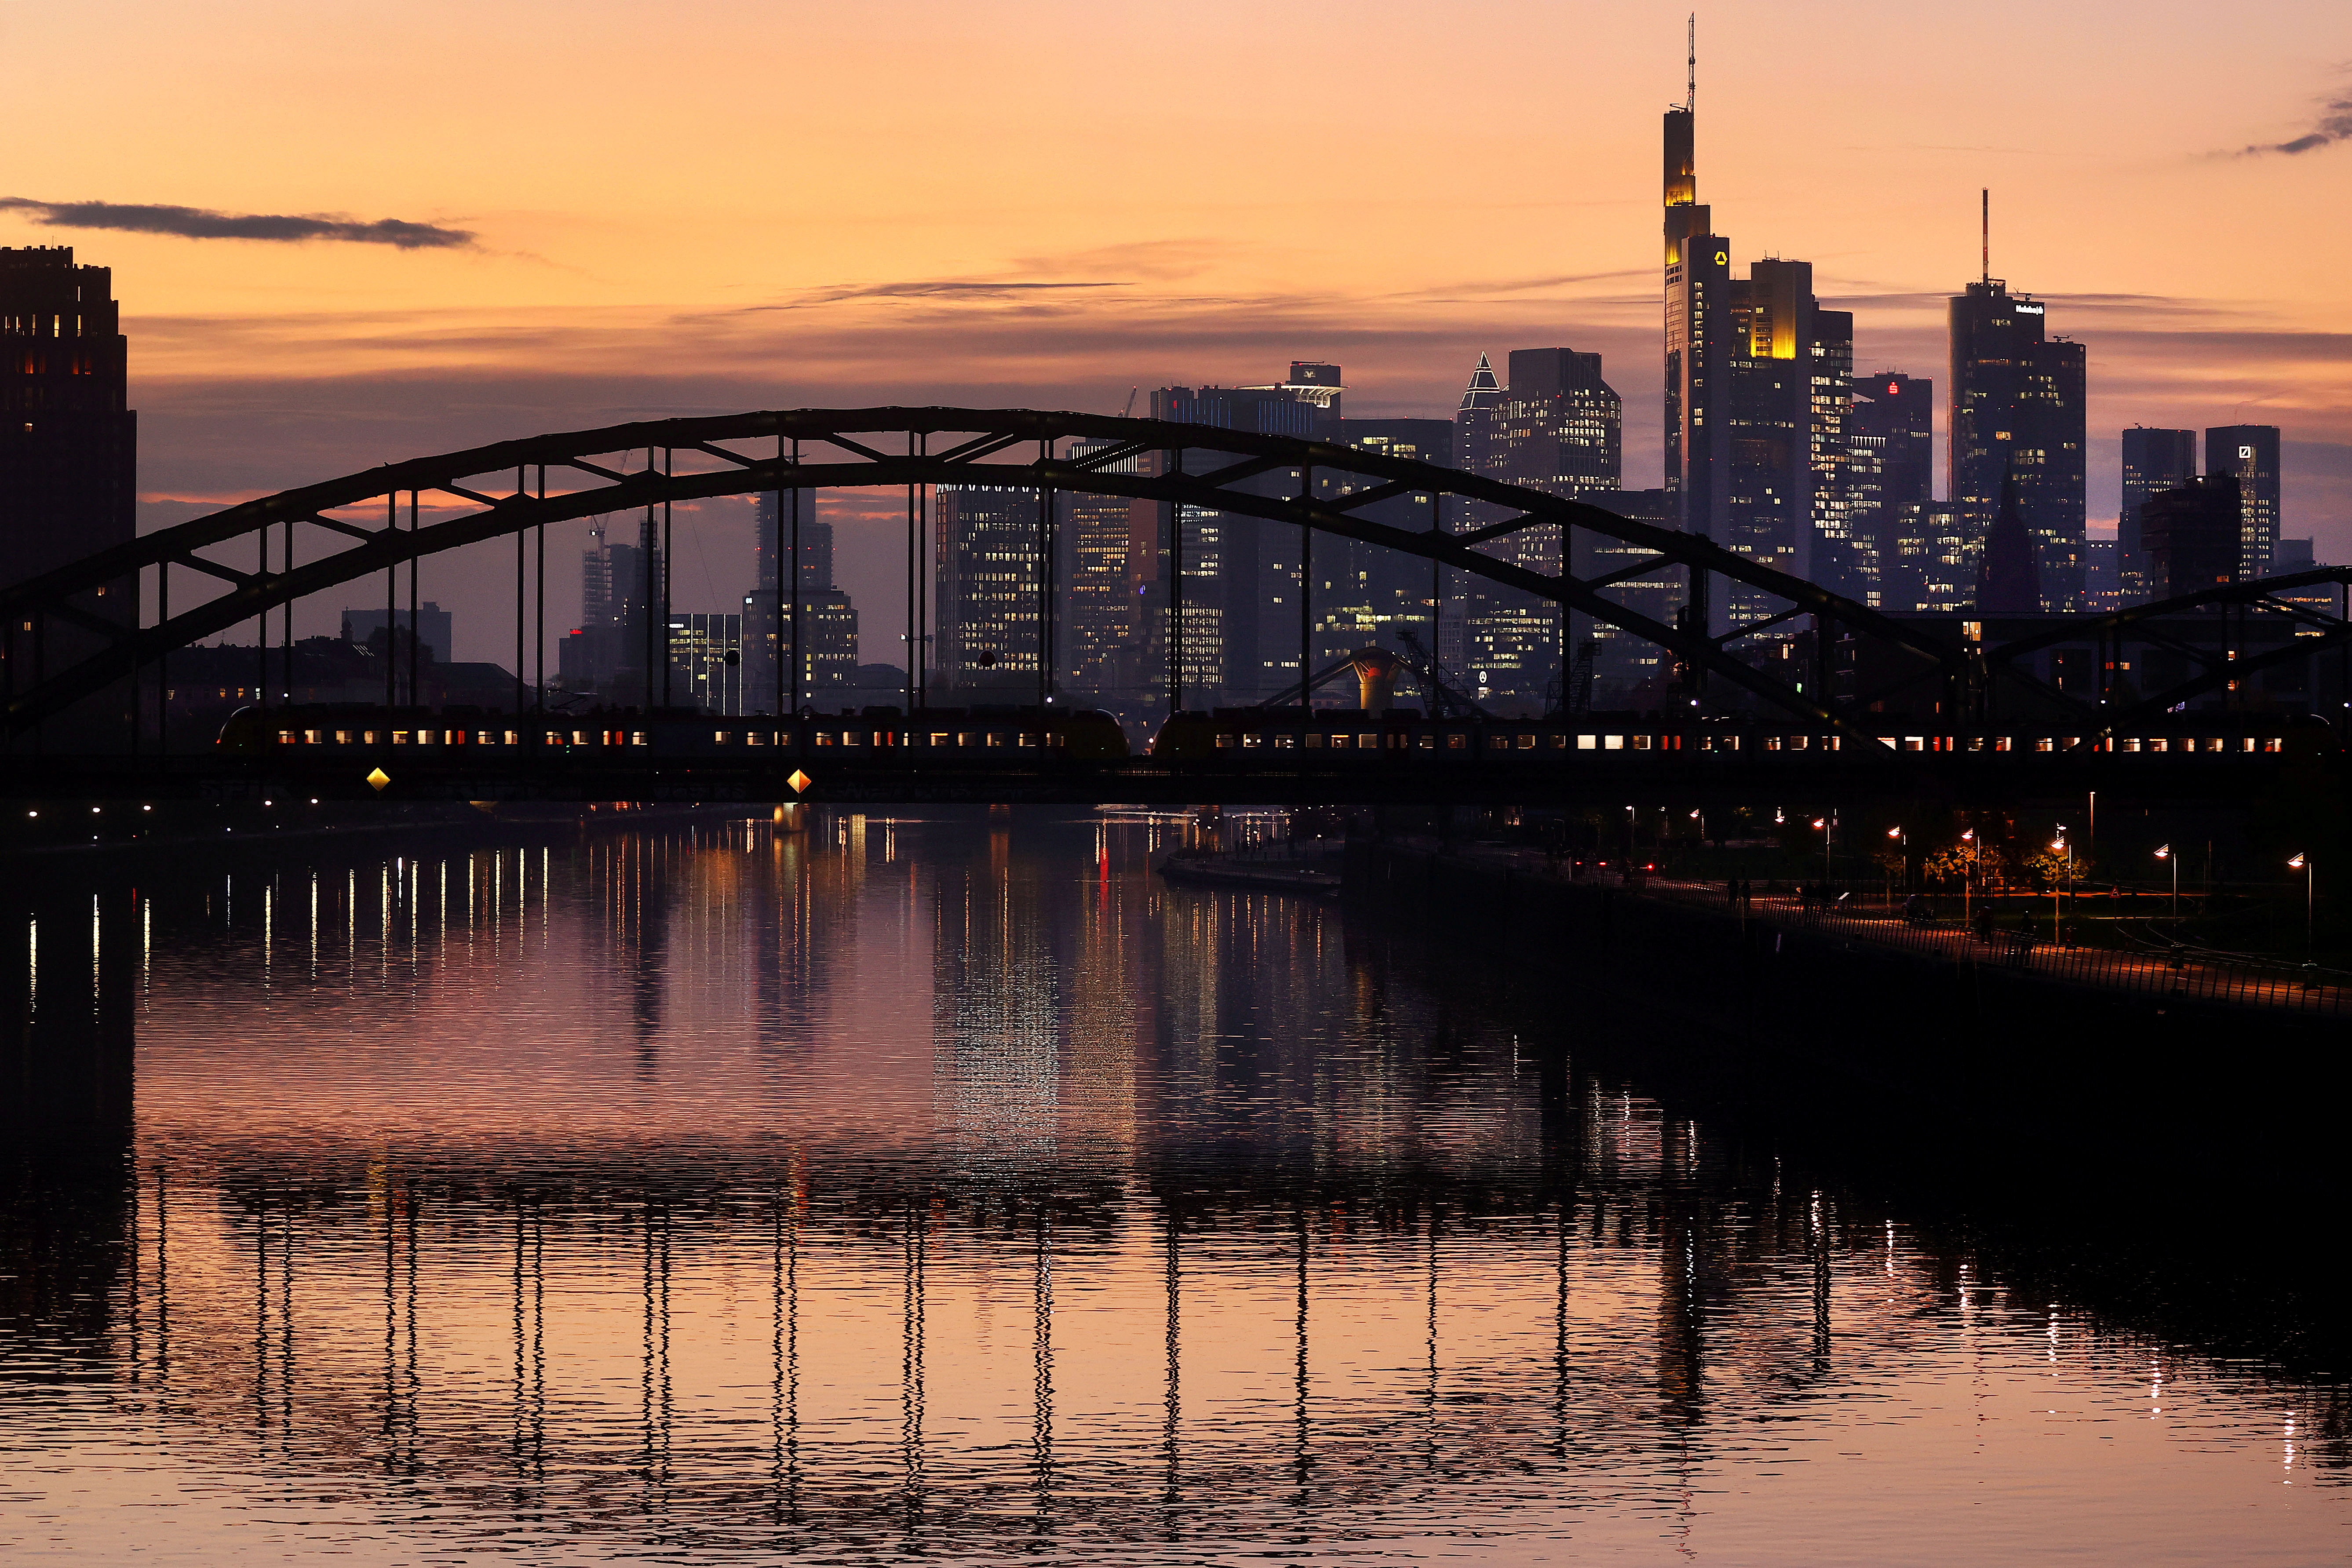 A commuter train passes by the skyline of the financial district in Frankfurt